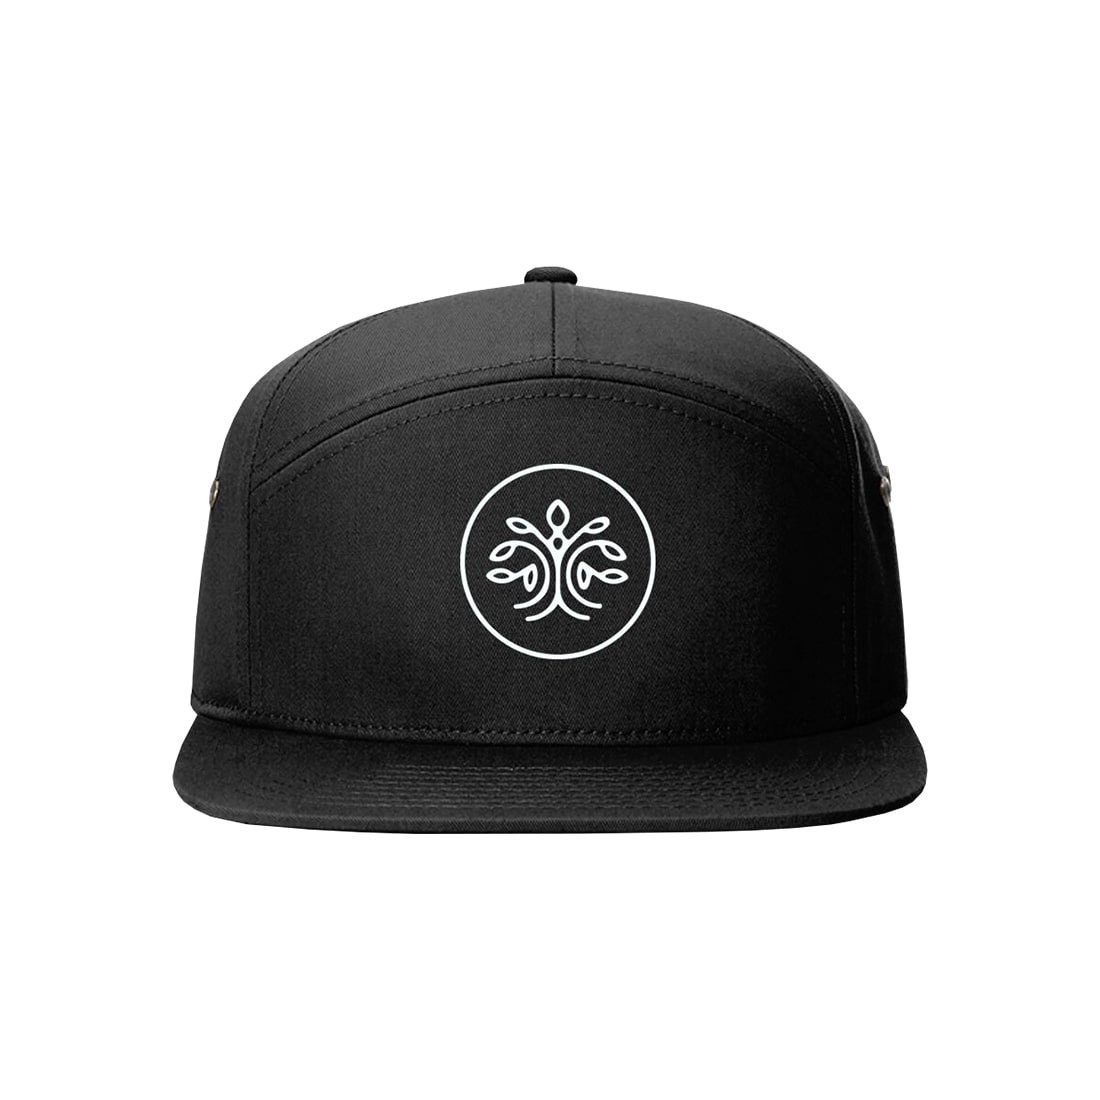 pj-product-page-hats - preview